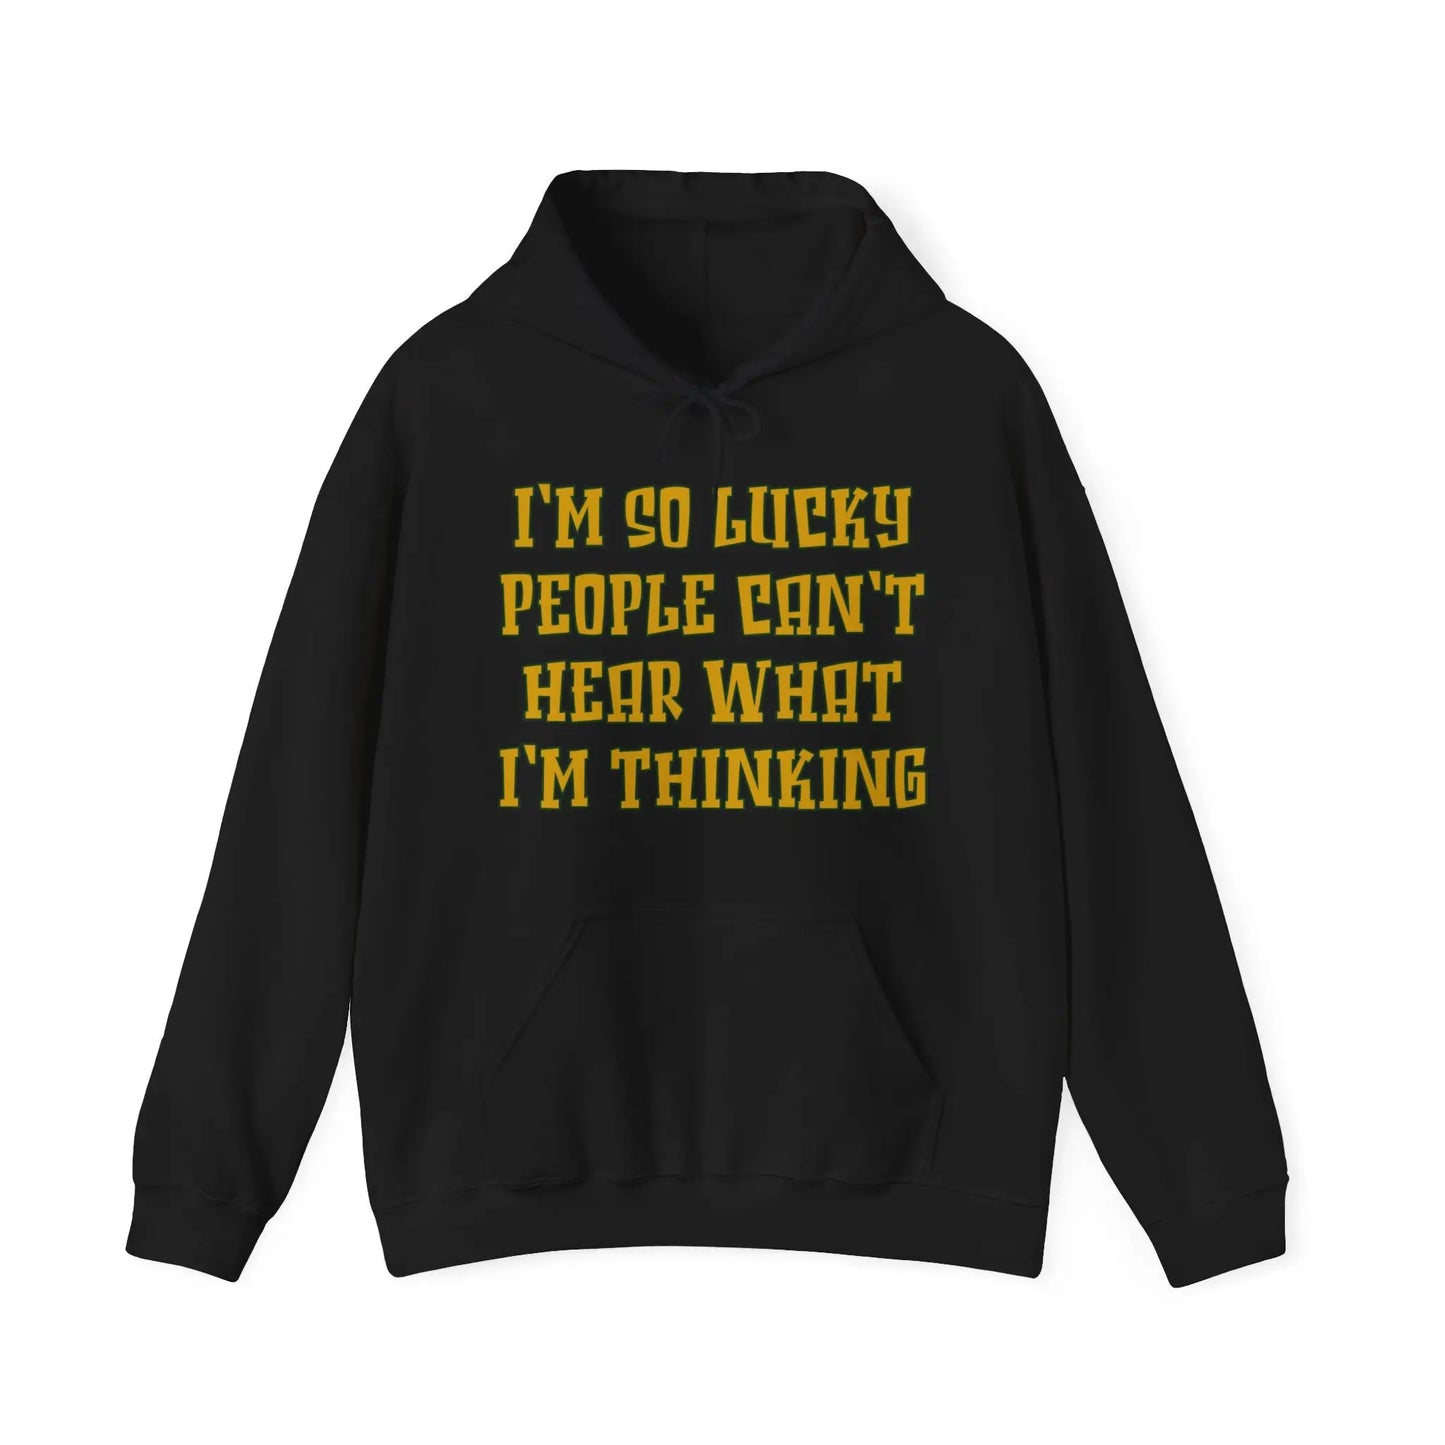 Can't Hear What I'm Thinking Men's Hooded Sweatshirt - Wicked Tees